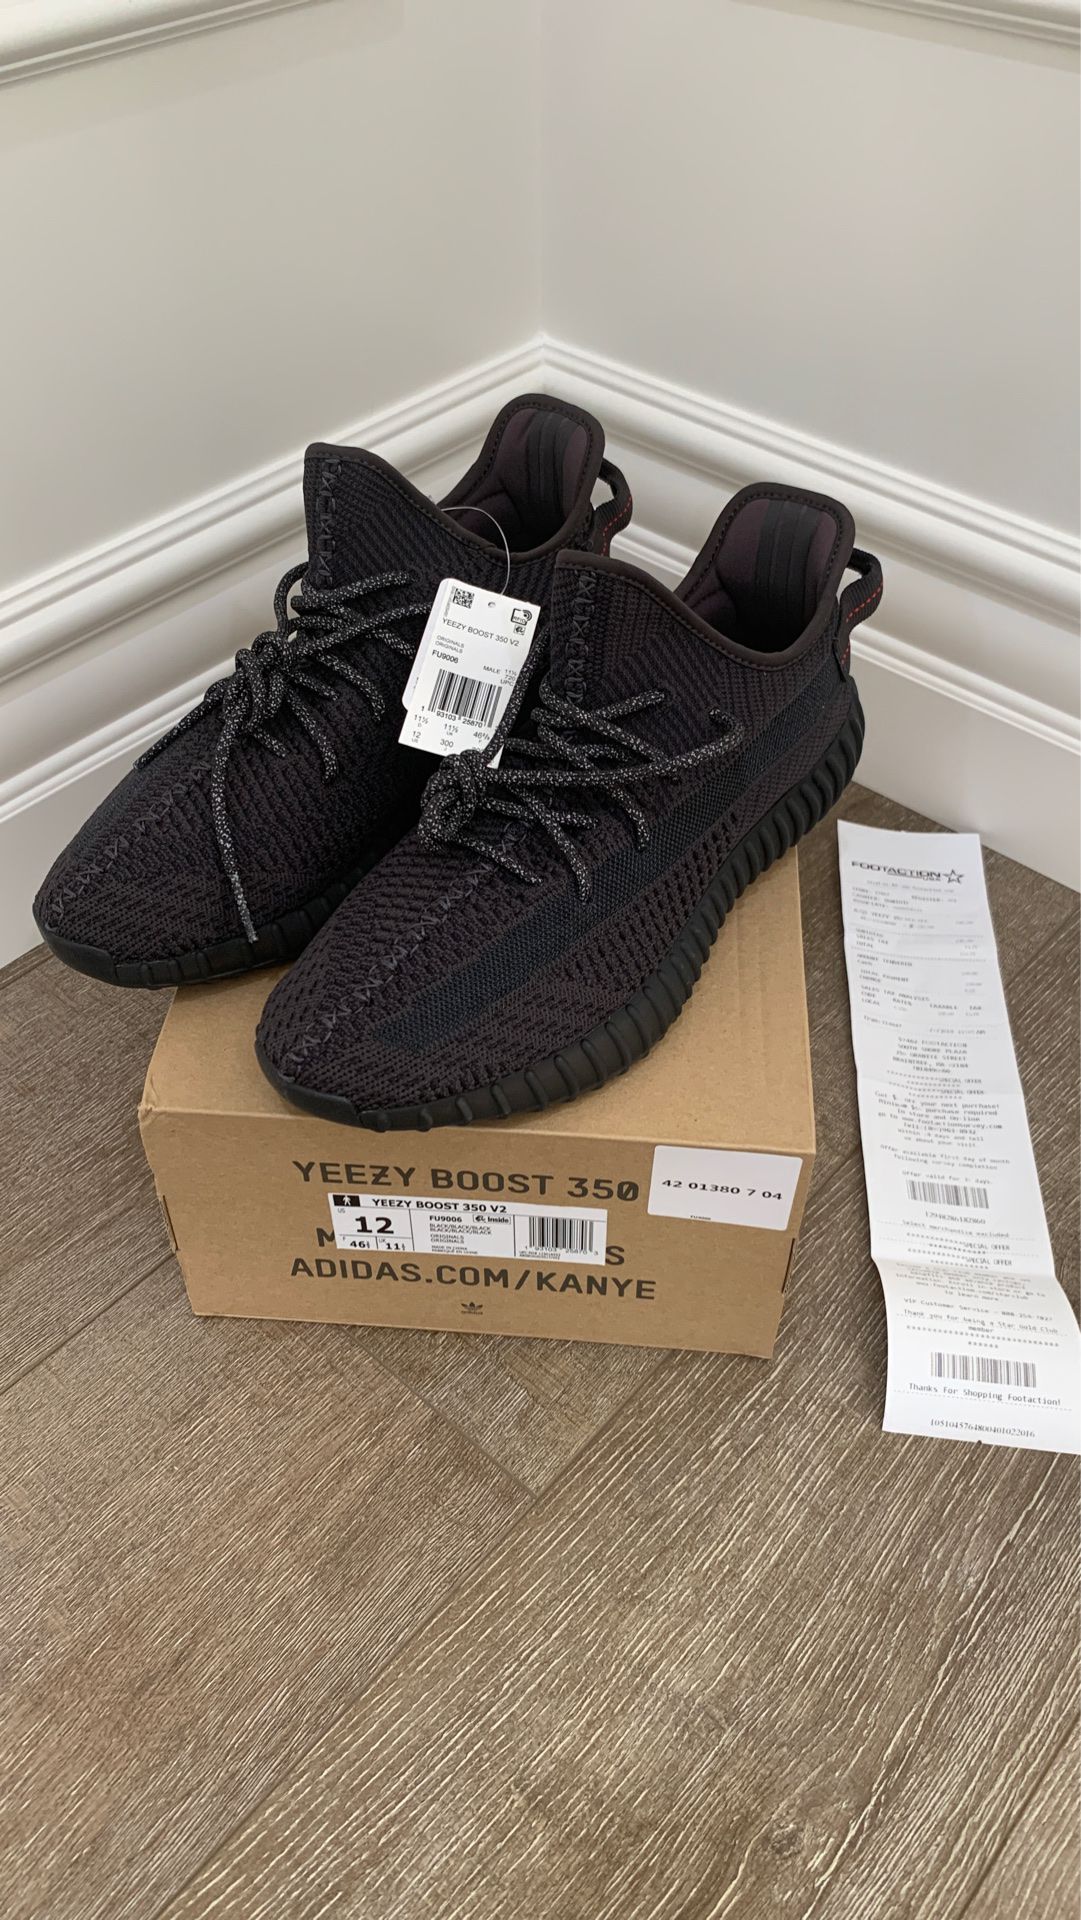 Brand New (Tags Attached) 100% Authentic Adidas Yeezy Boost 350 V2 ‘Black Non-Reflective’ – SKU # FU9006 – Size: 12.00 US